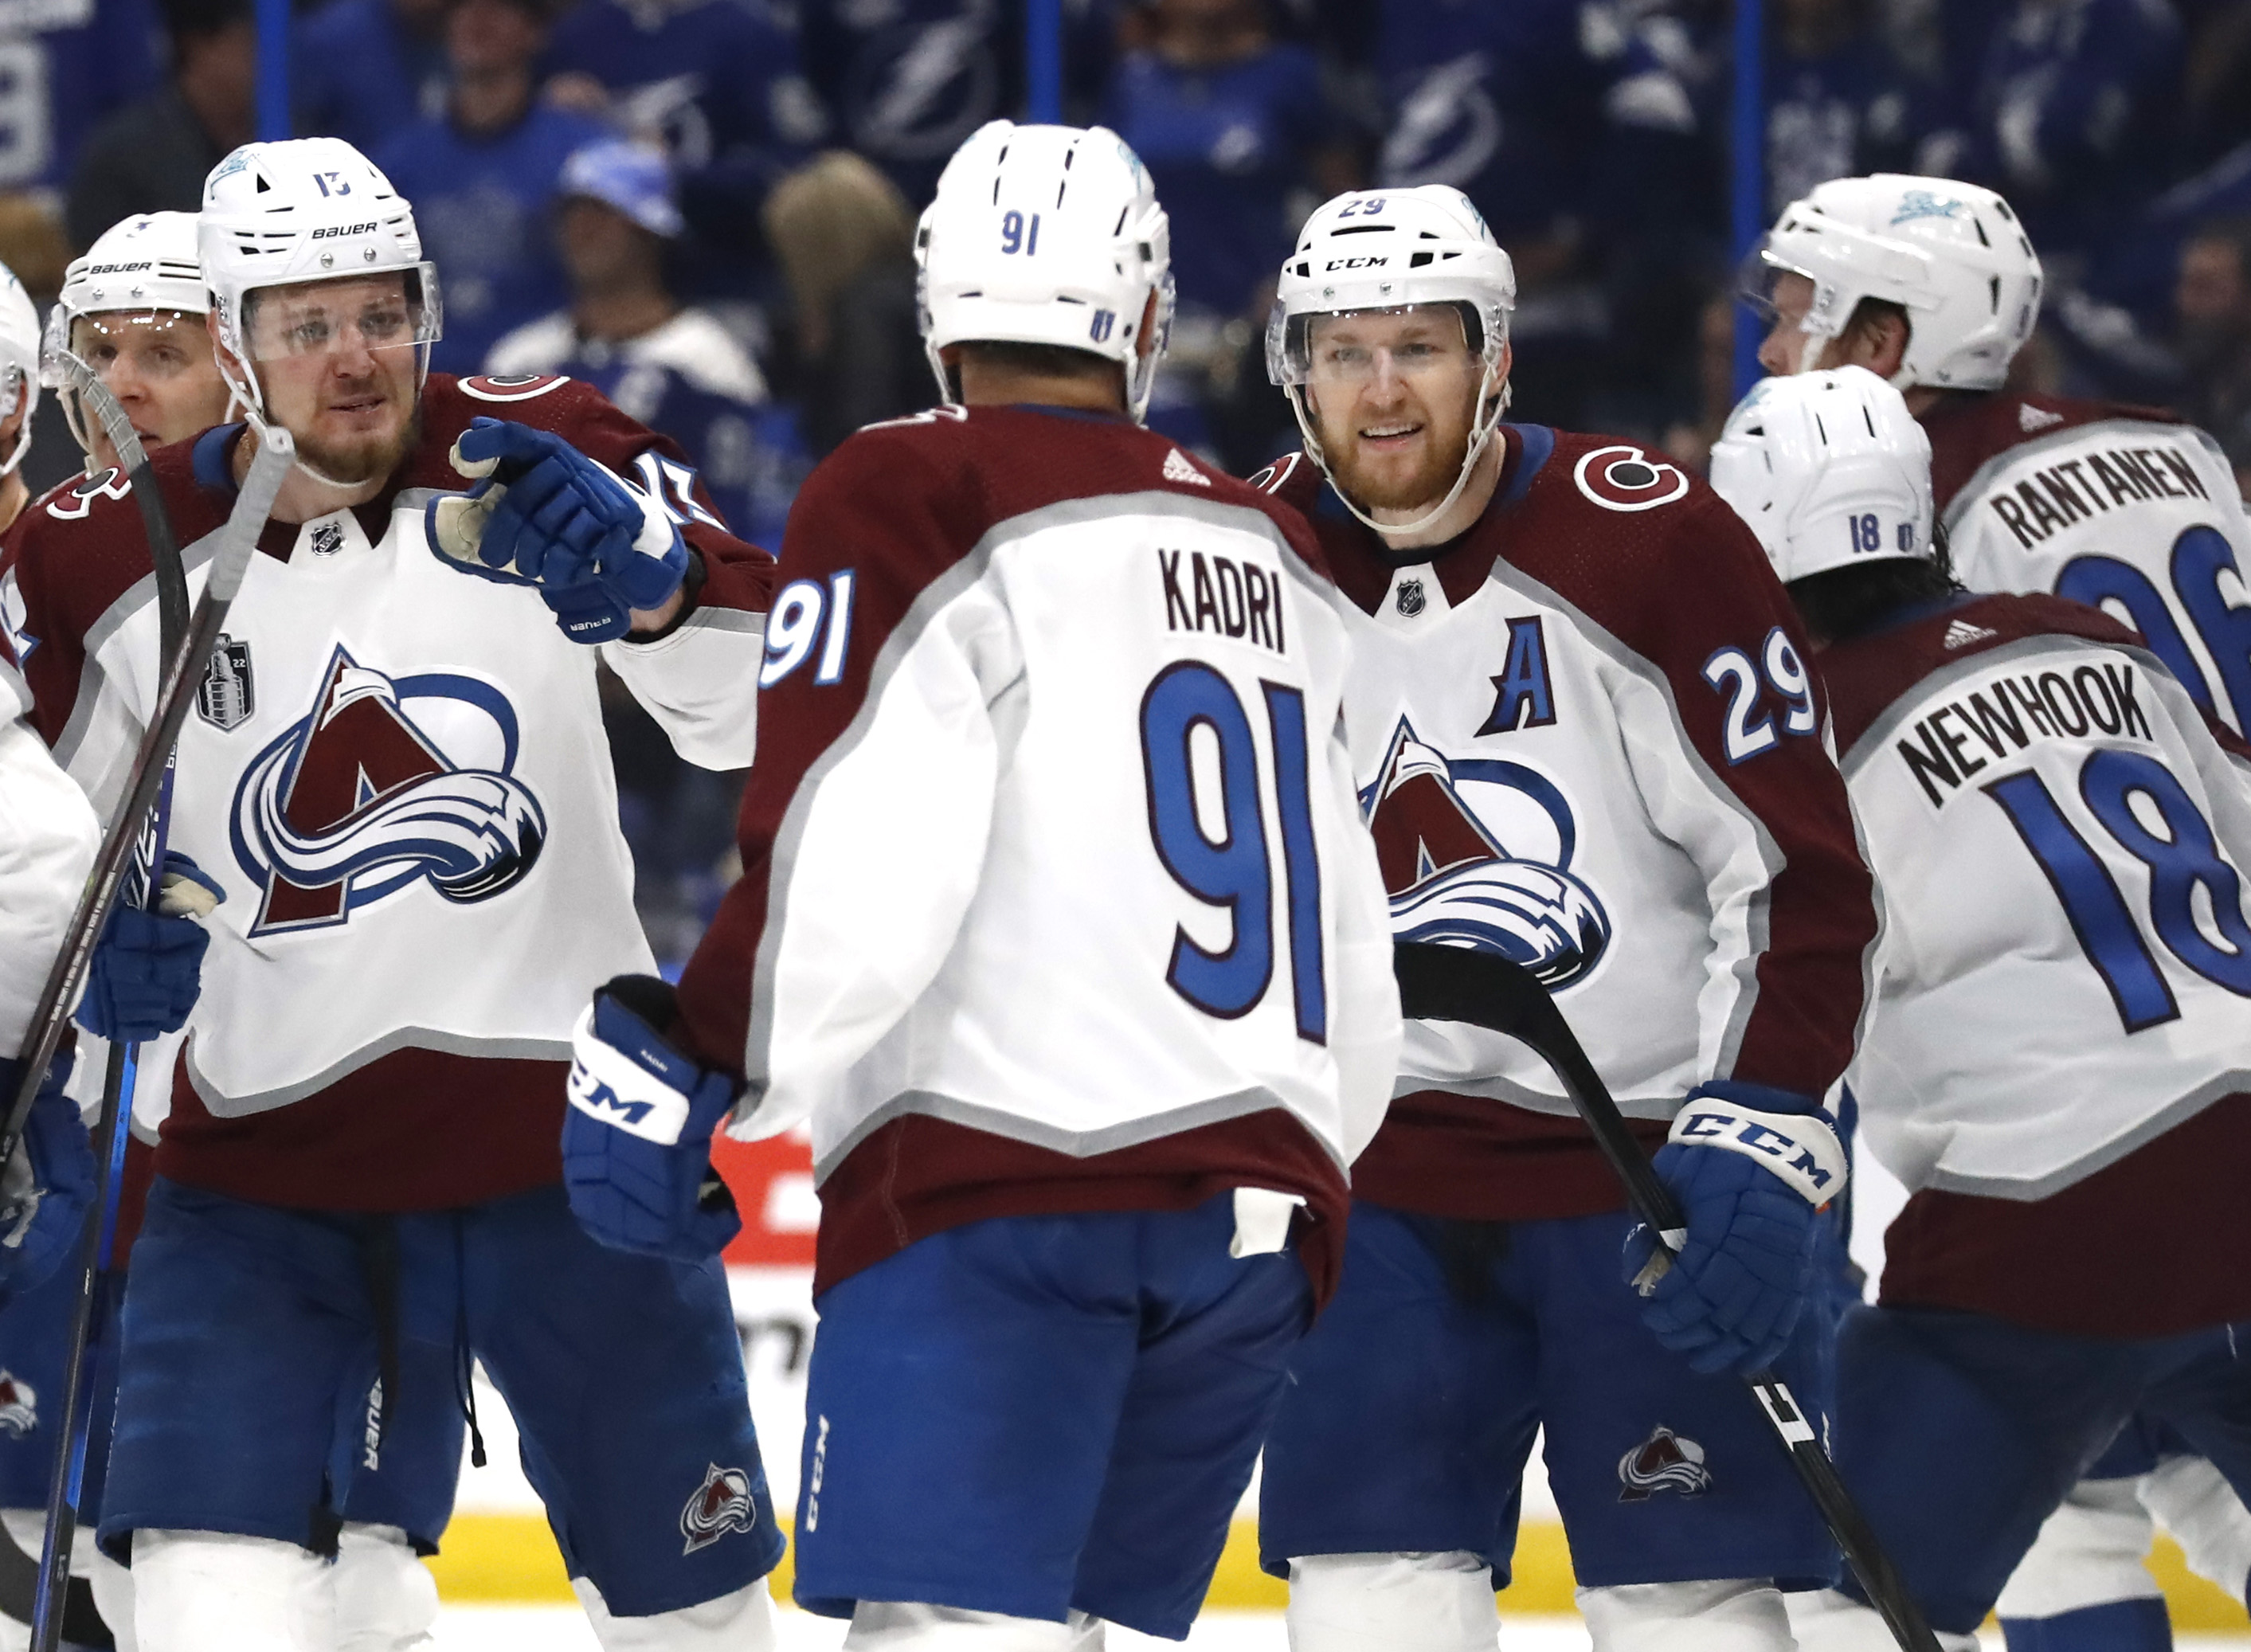 Valeri Nichushkin #13 and Nathan MacKinnon #29 of the Colorado Avalanche celebrate the game winning goal by Nazem Kadri #91 who scored in overtime to defeat the Tampa Bay Lightning 3-2 in Game Four of the 2022 NHL Stanley Cup Final at Amalie Arena on June 22, 2022 in Tampa, Florida.